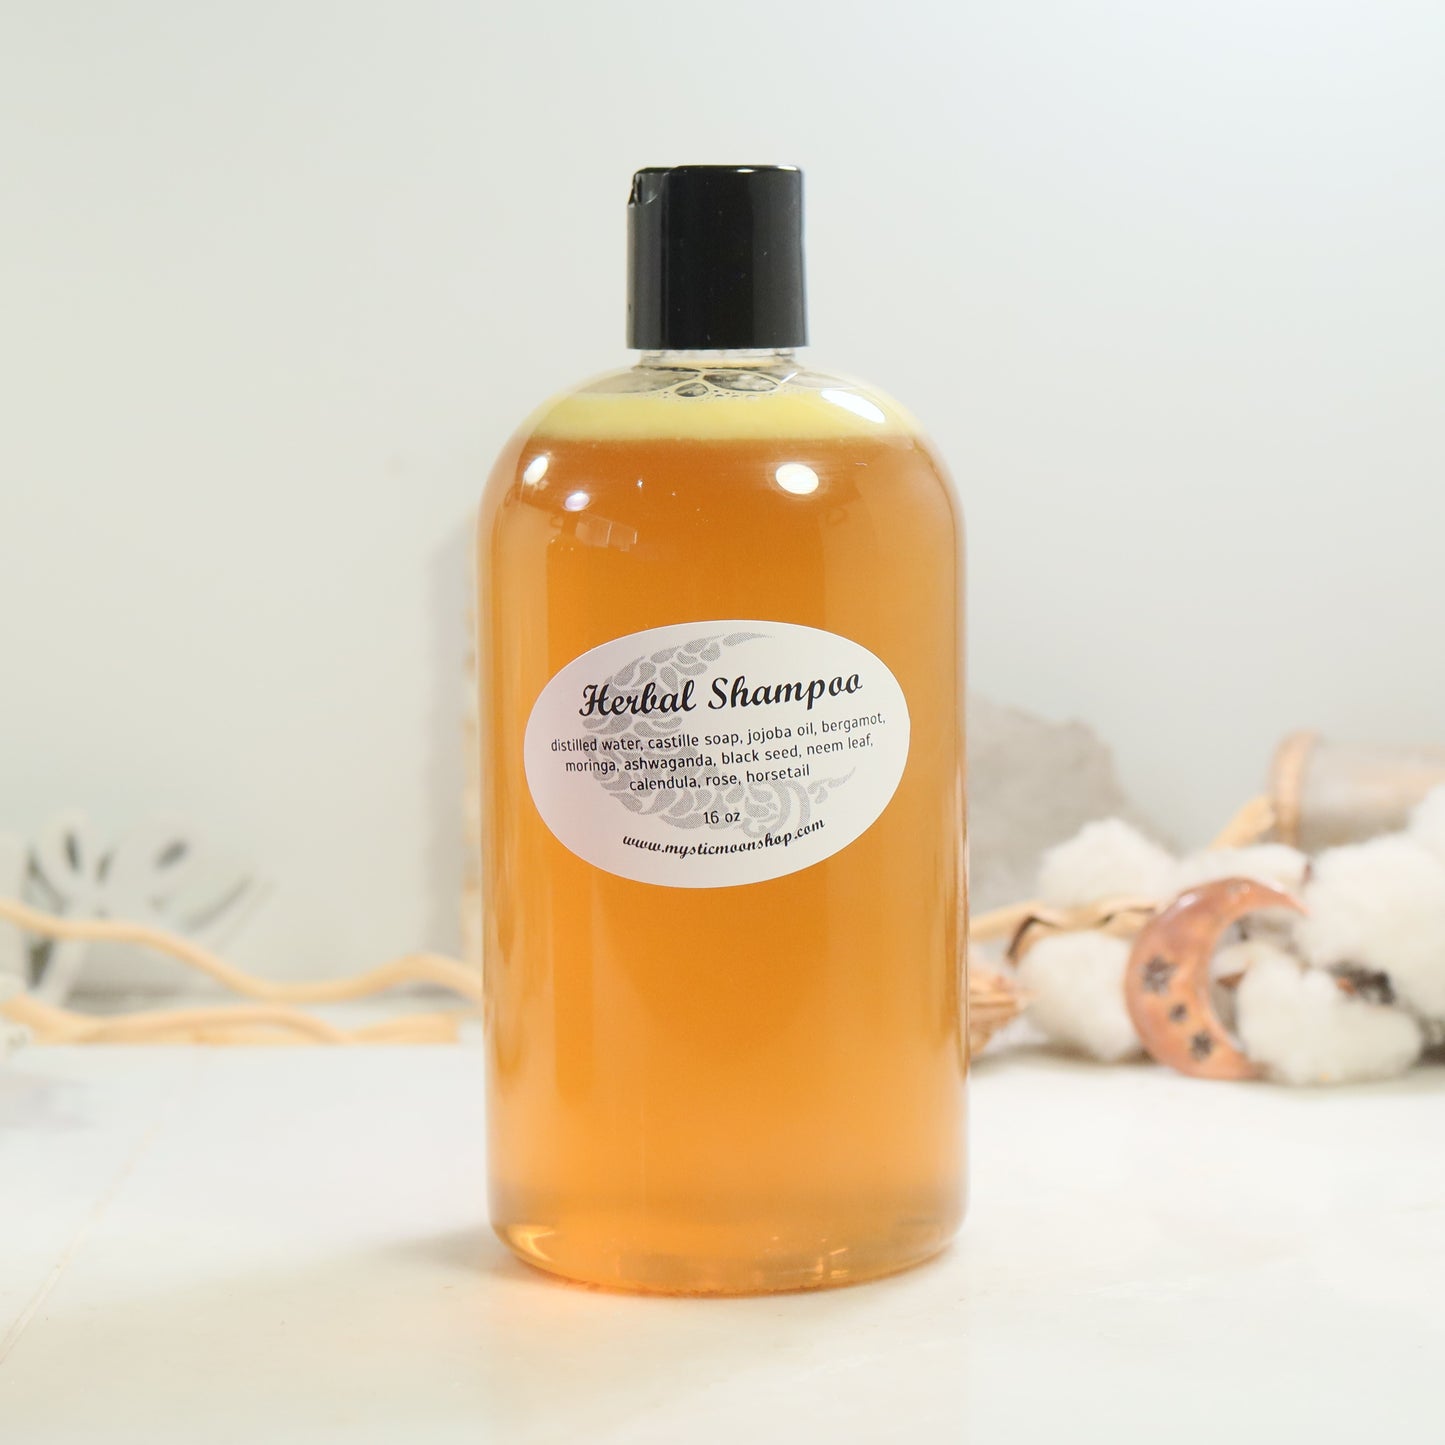 Bottle of Herbal Infused Shampoo